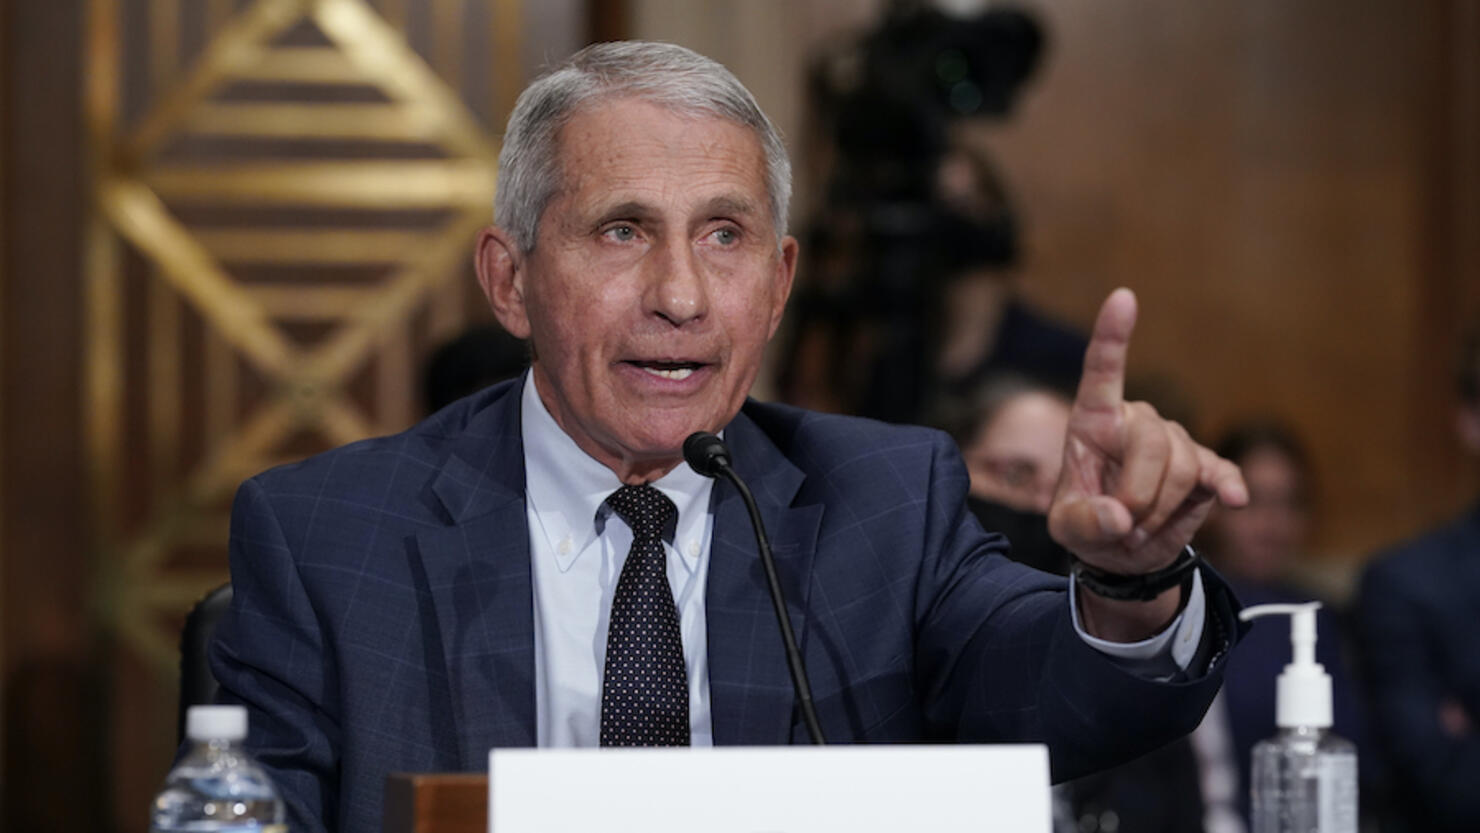 Dr. Fauci Testifies To Senate Health Committee On Country's COVID-19 Response